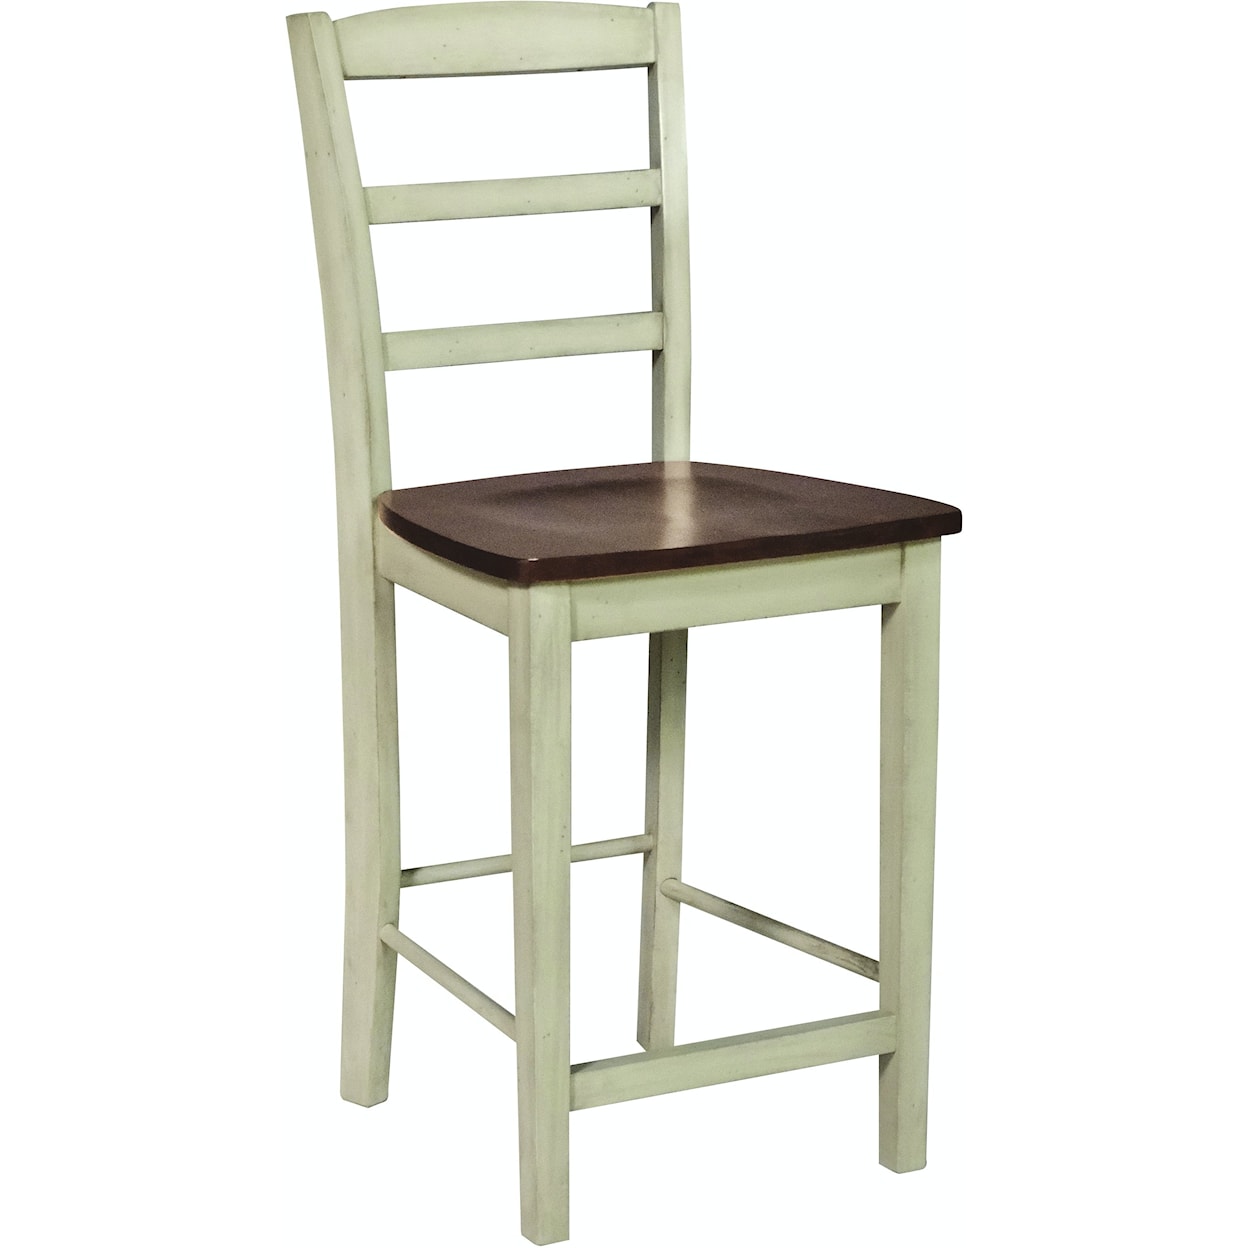 John Thomas Dining Essentials Madrid Counter Stool in Expresso / Almond